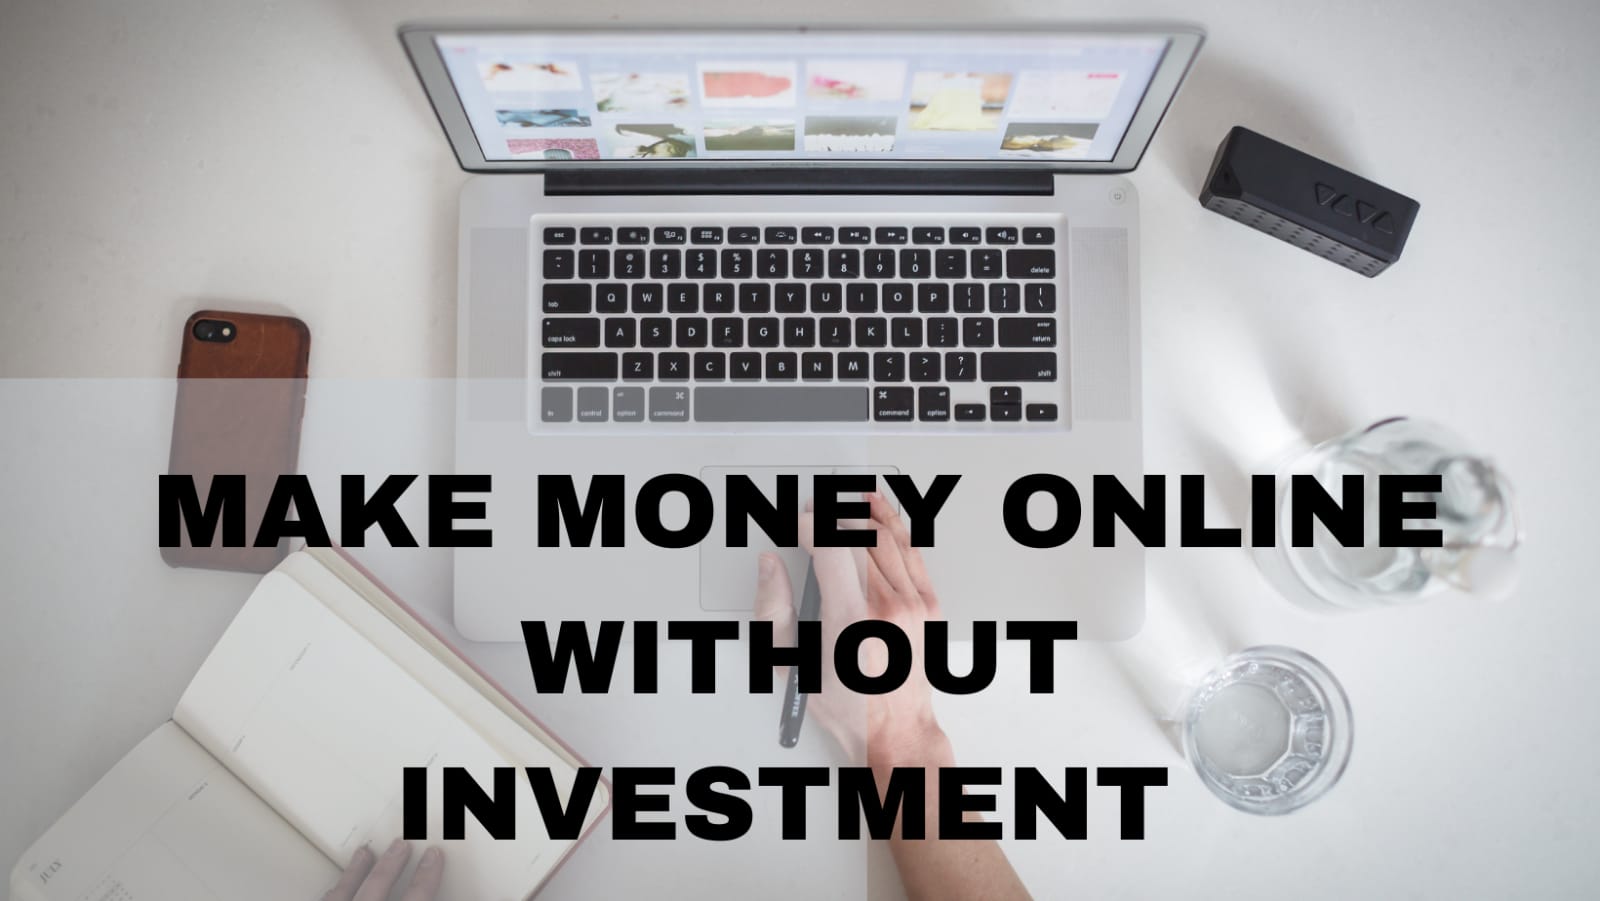 Here’s how You can make Money Online from Home without Investment